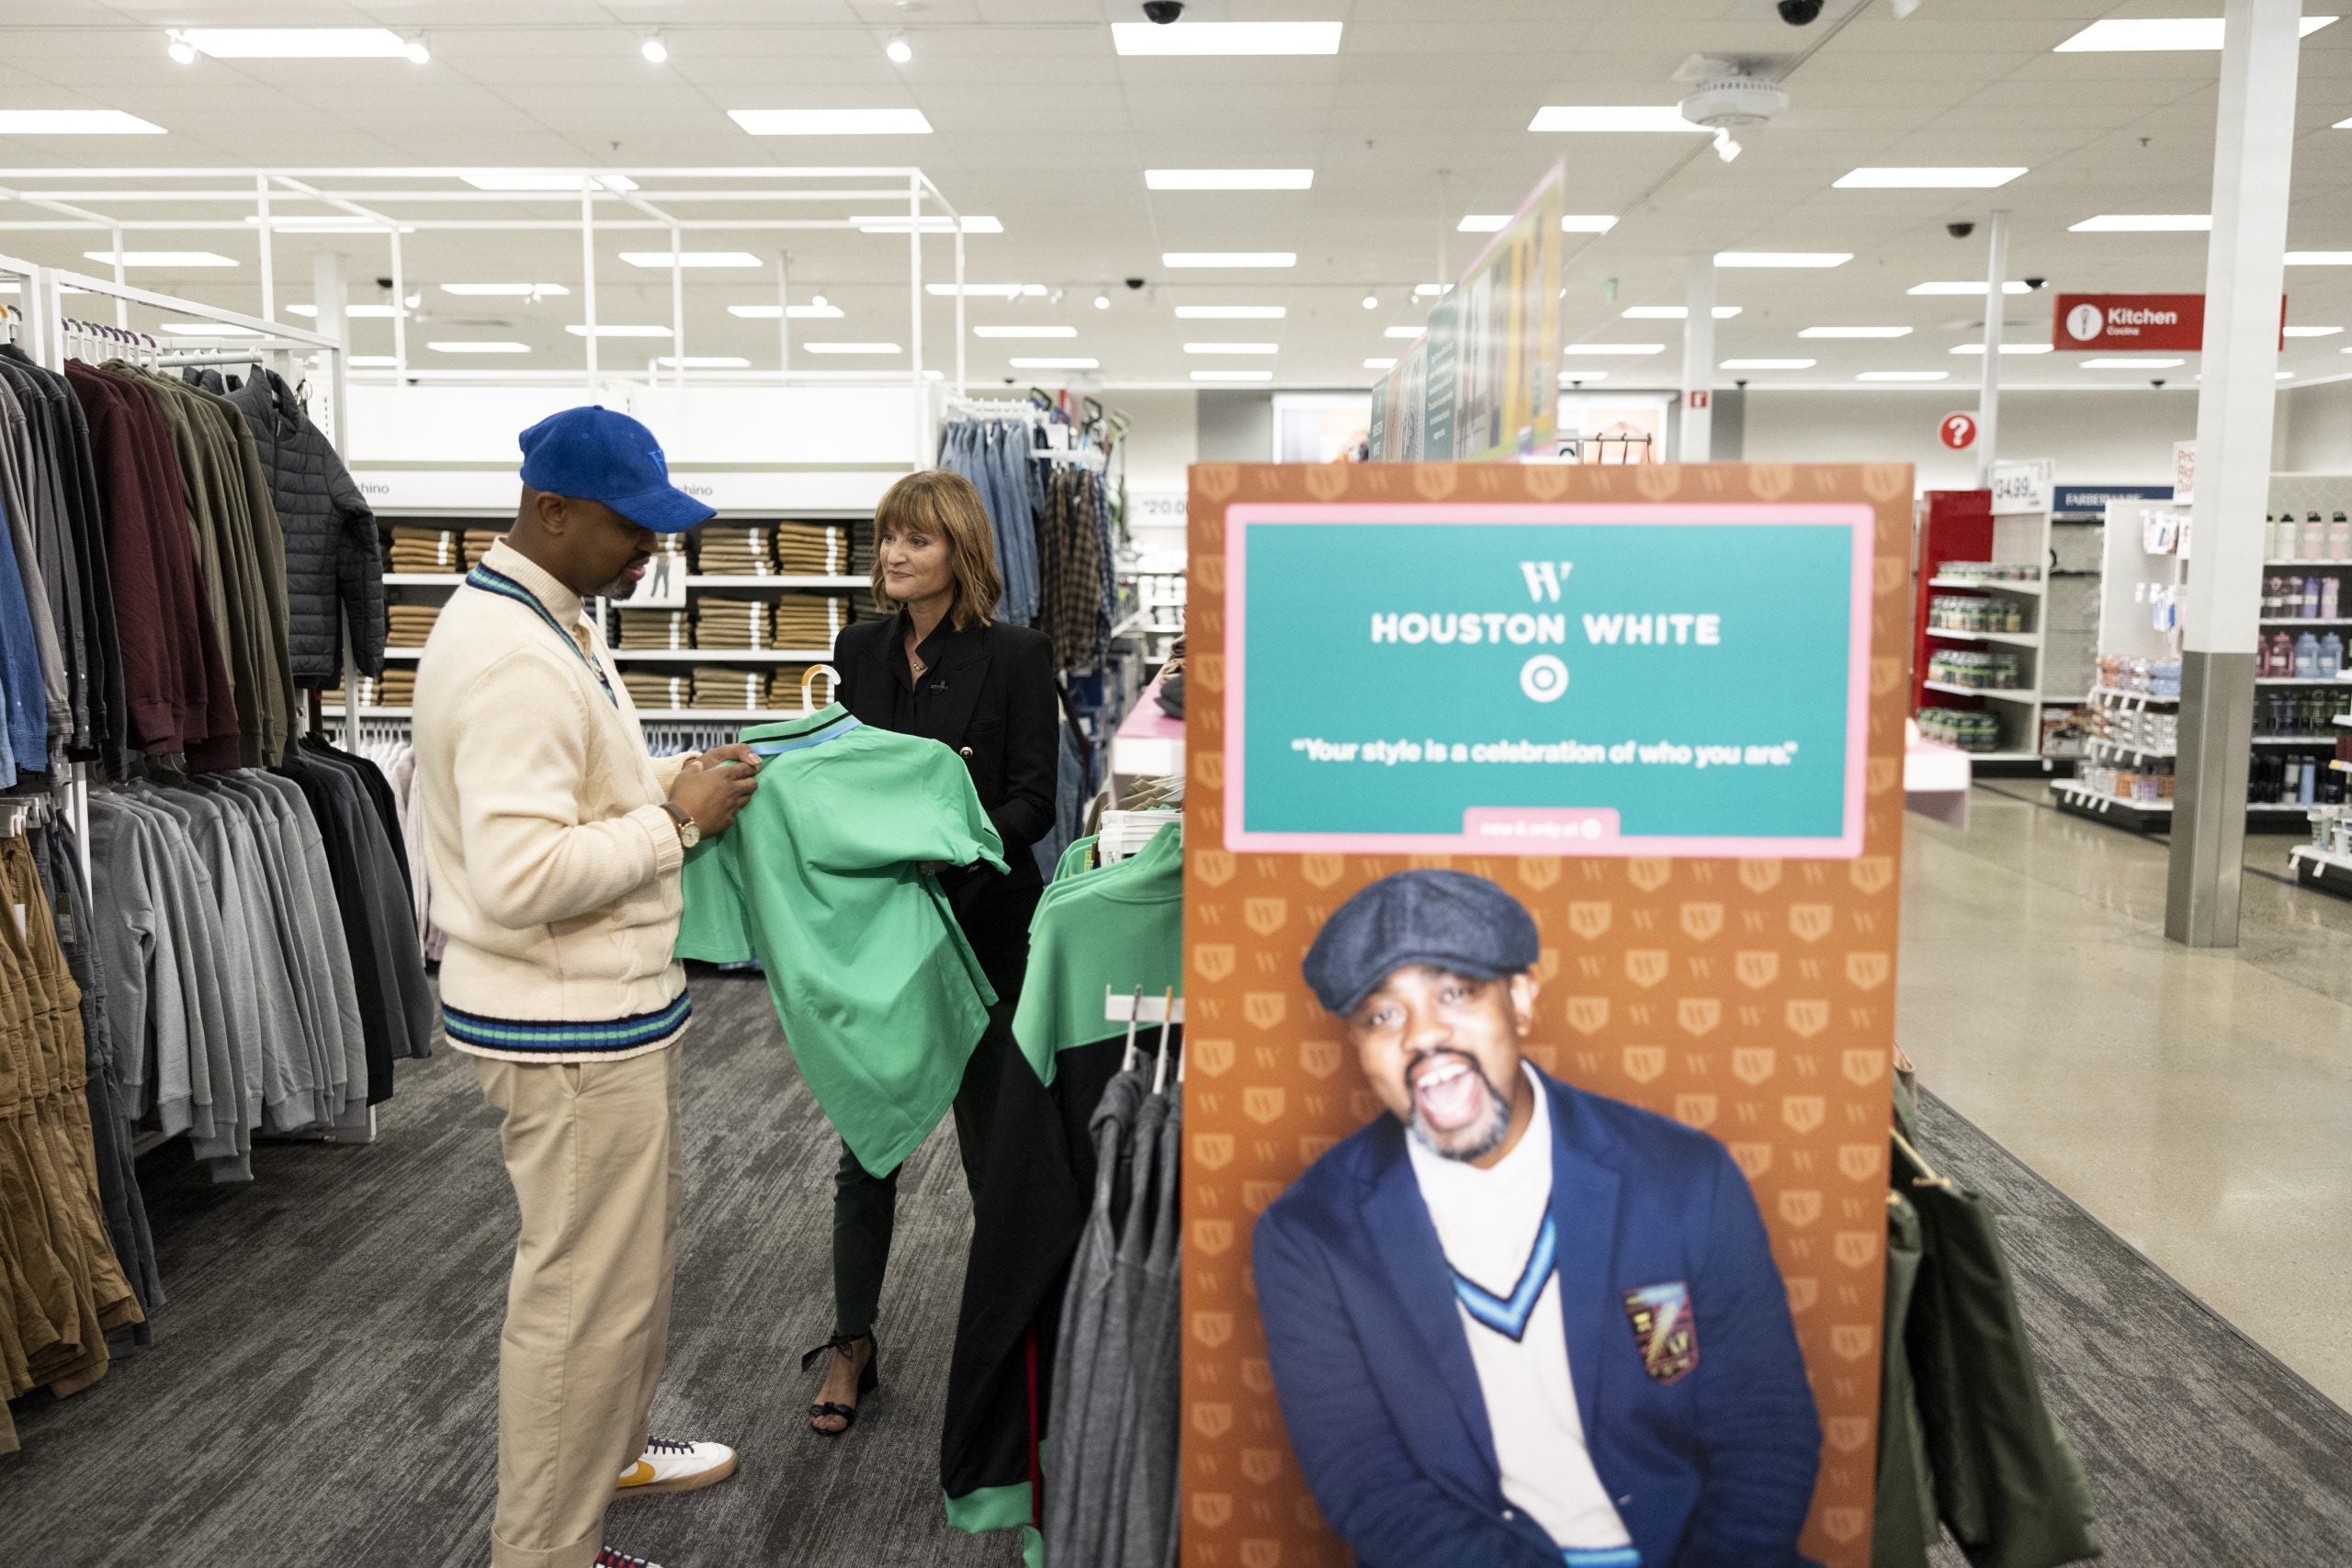 Houston White Launches Collection With Target